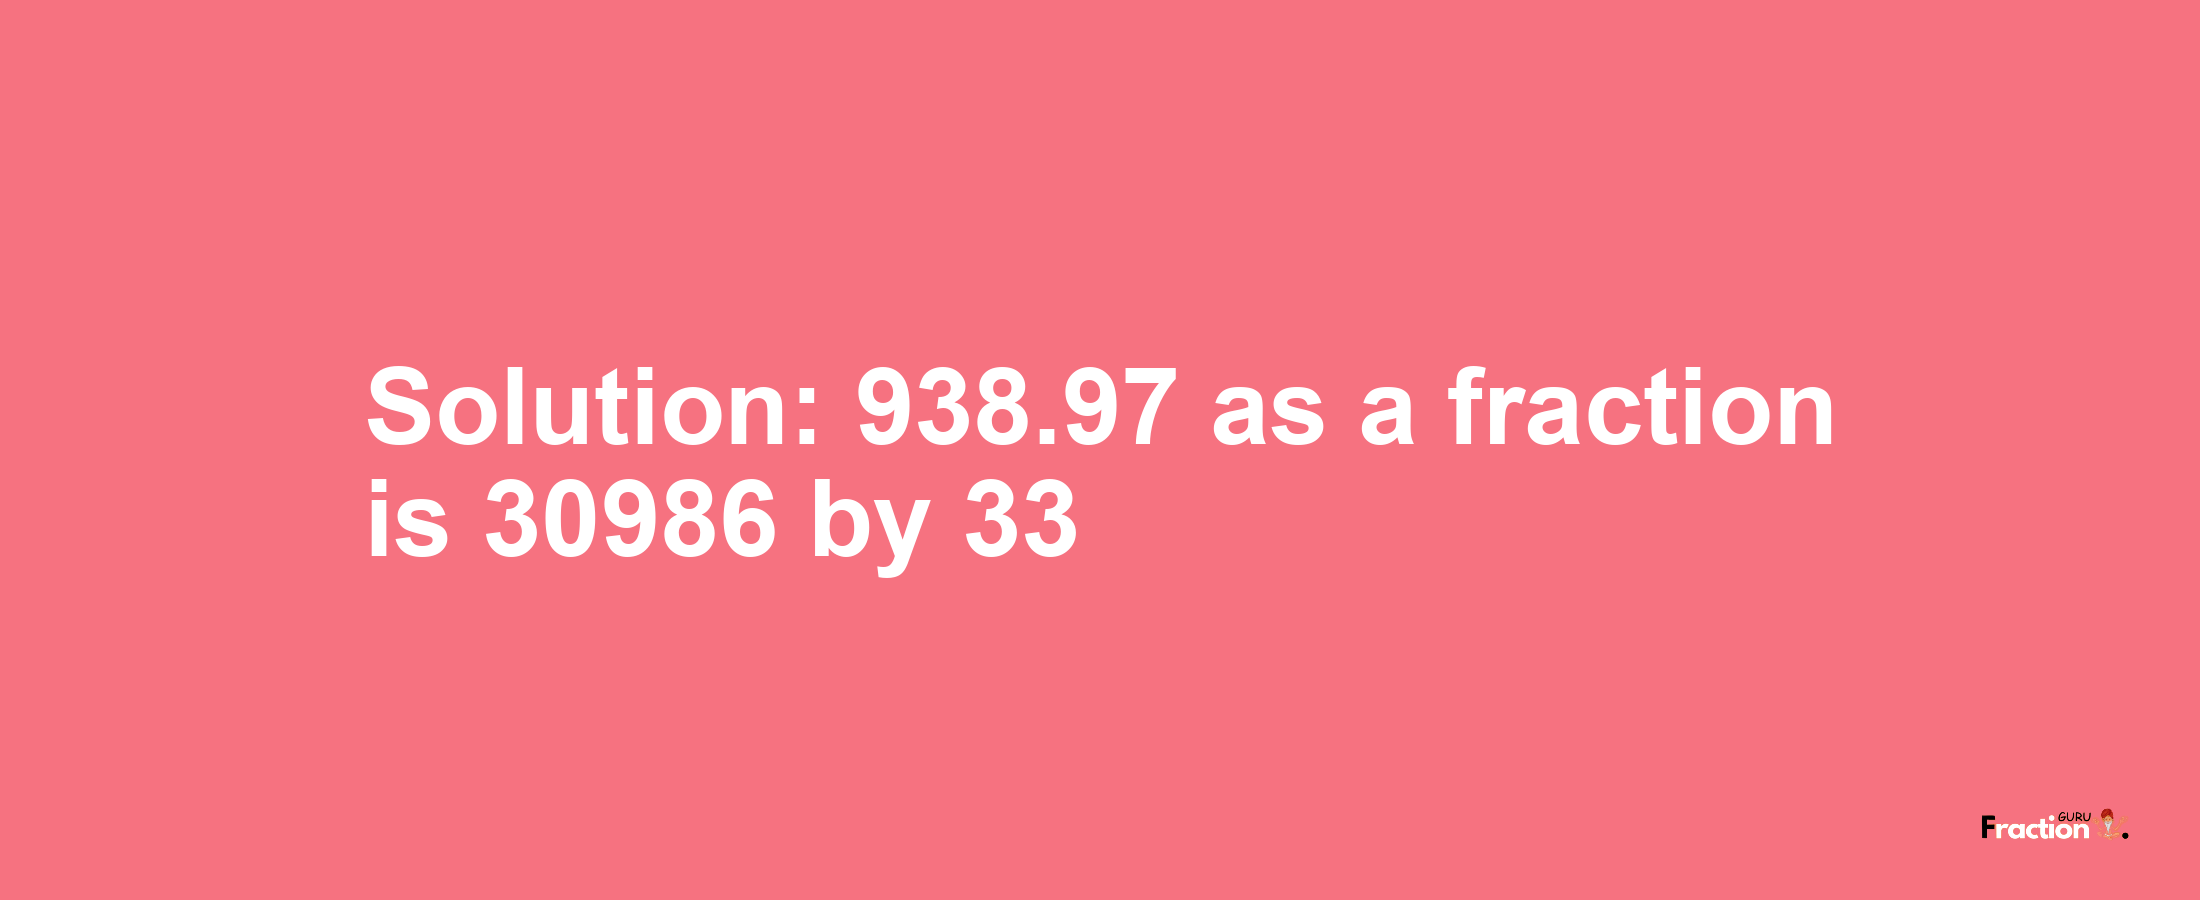 Solution:938.97 as a fraction is 30986/33